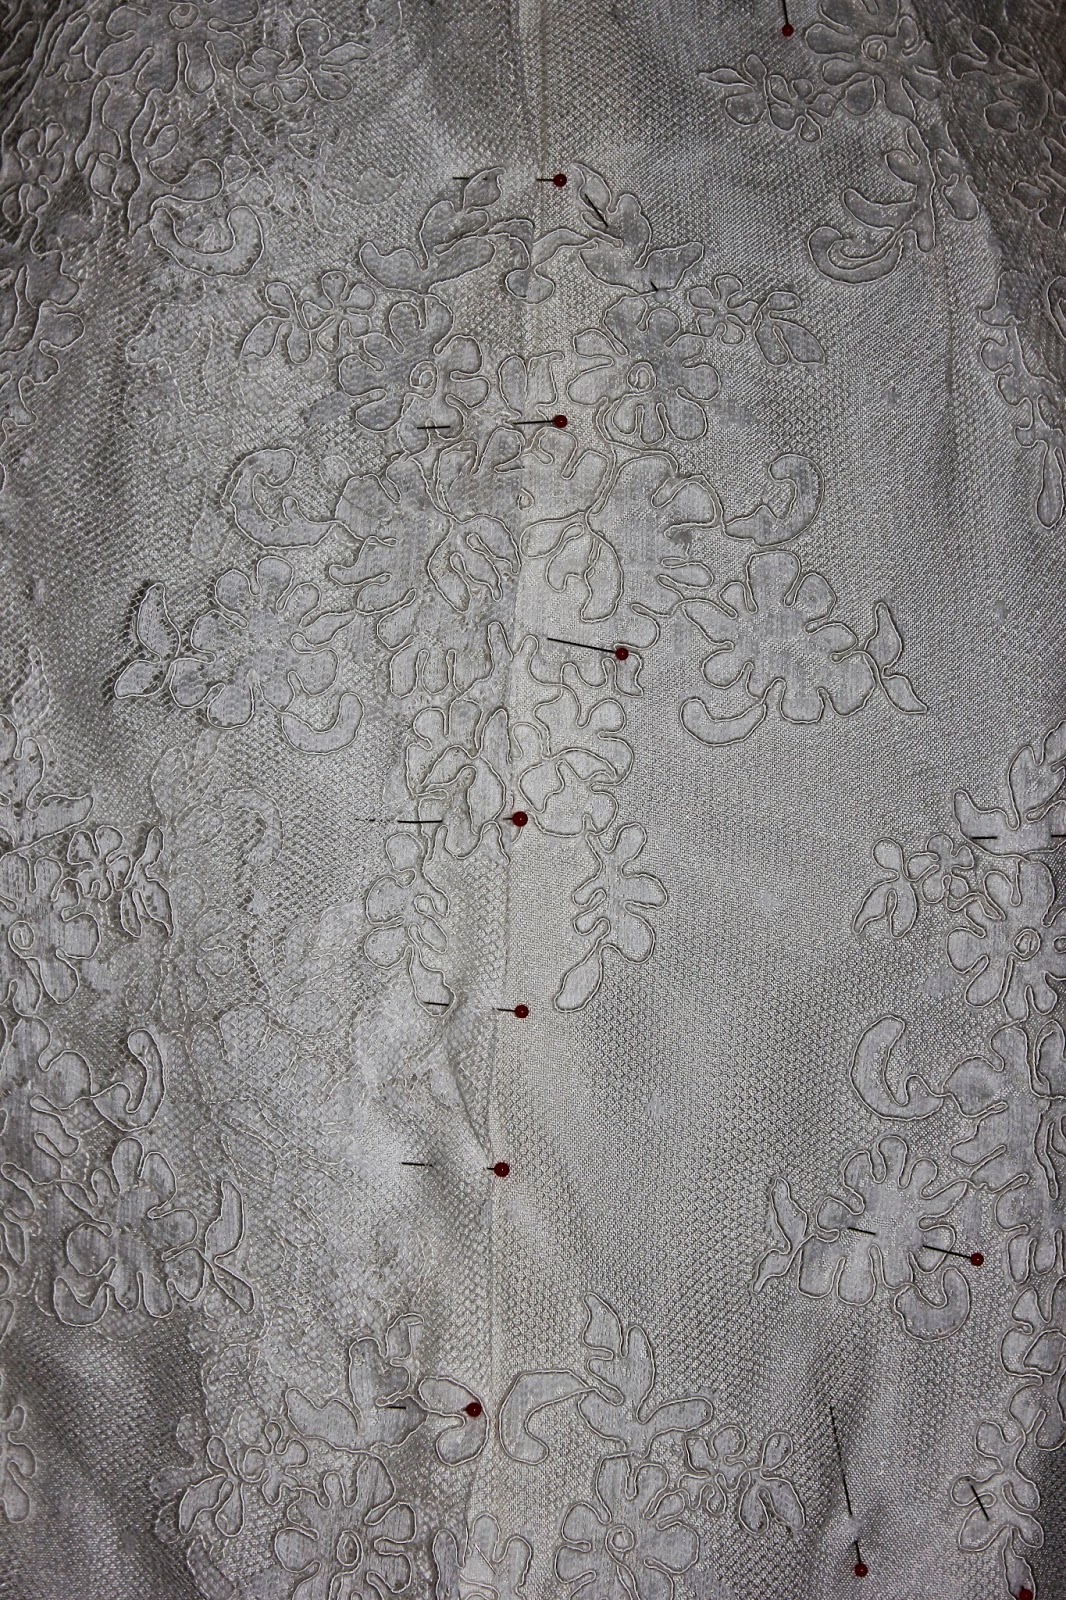 sewn threads: The birth of a wedding gown